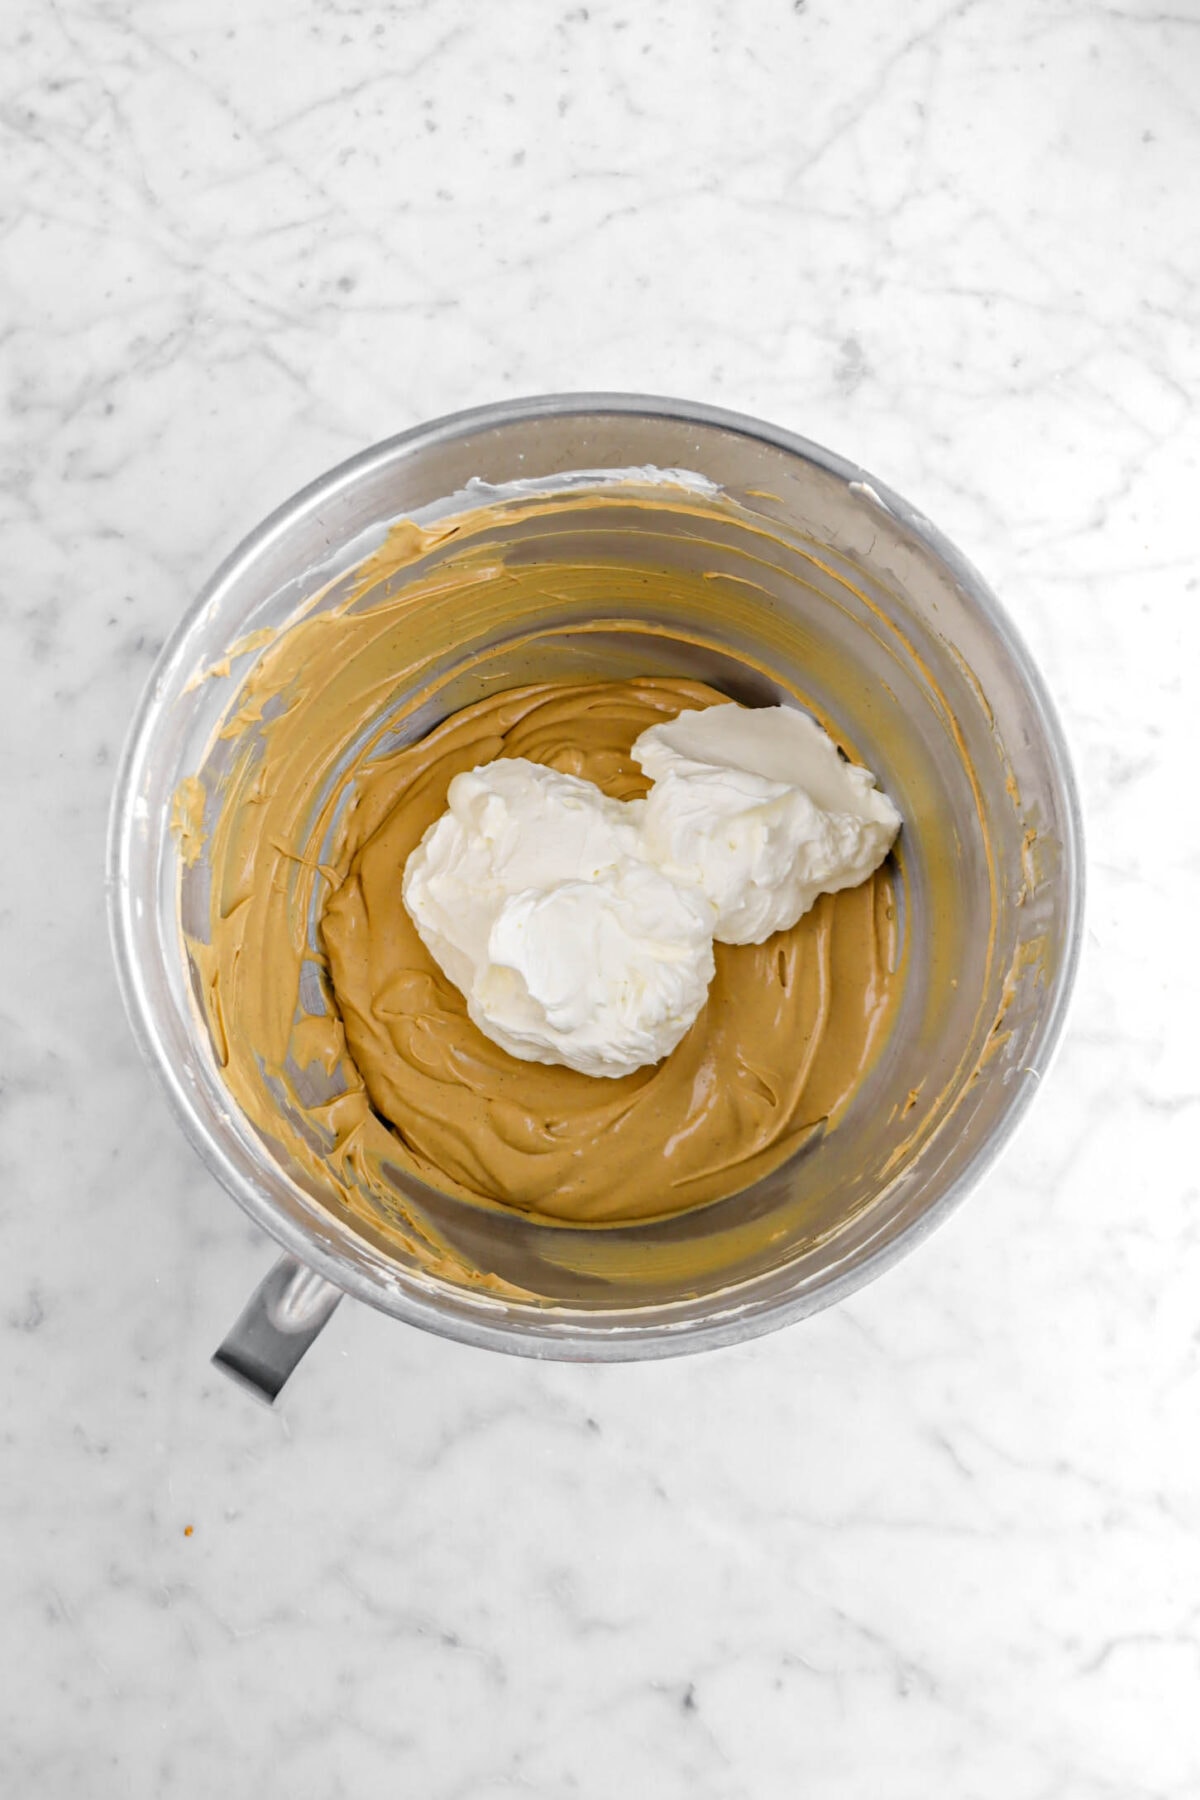 whipped cream added on top of cream cheese molasses mixture.